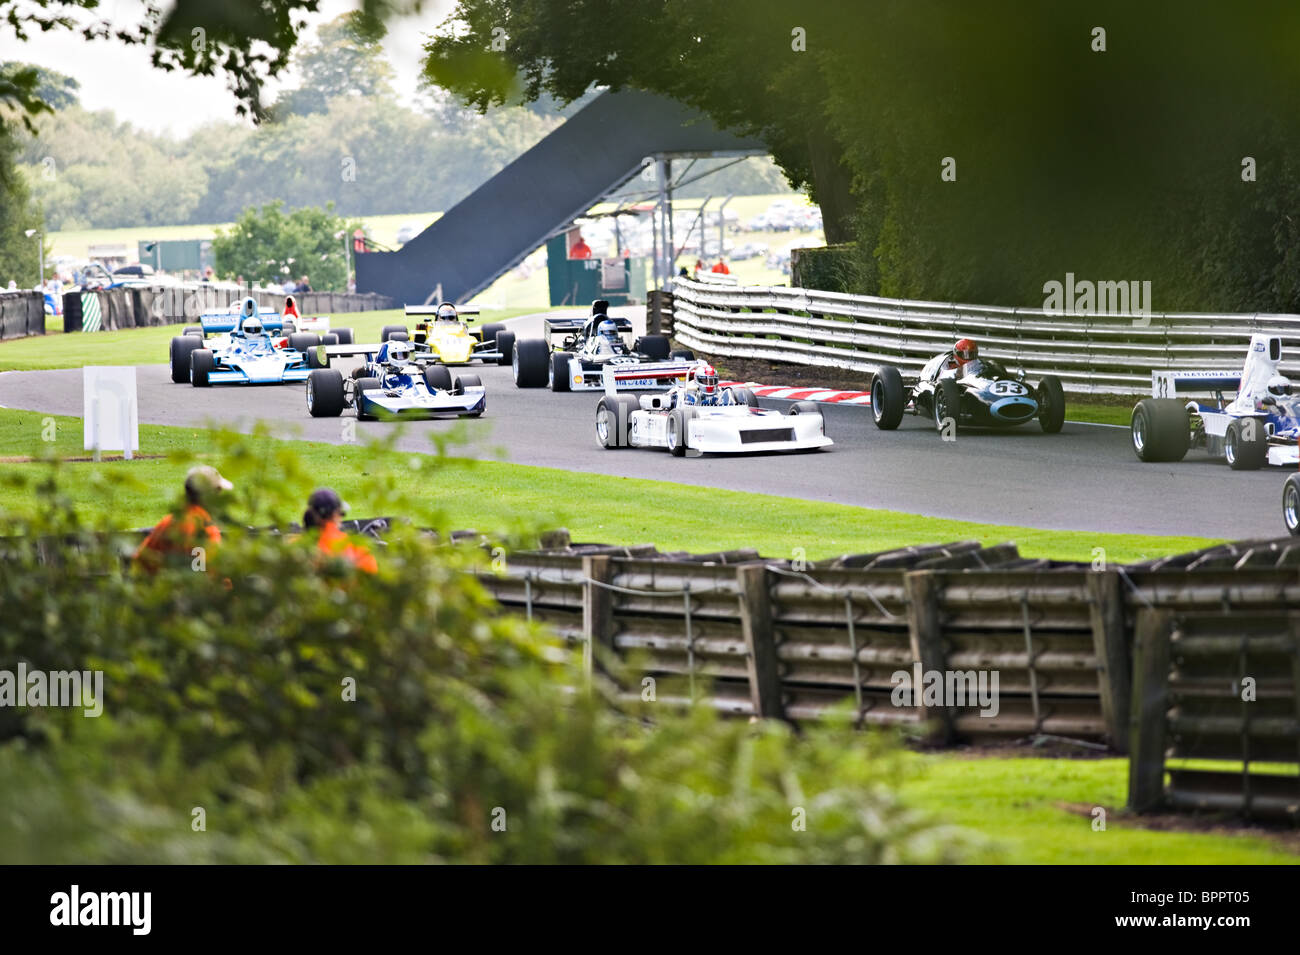 Old Racing Cars Approach Druids Corner in Derek Bell Trophy Race at Oulton Park Motor Racing Circuit Cheshire England UK Stock Photo